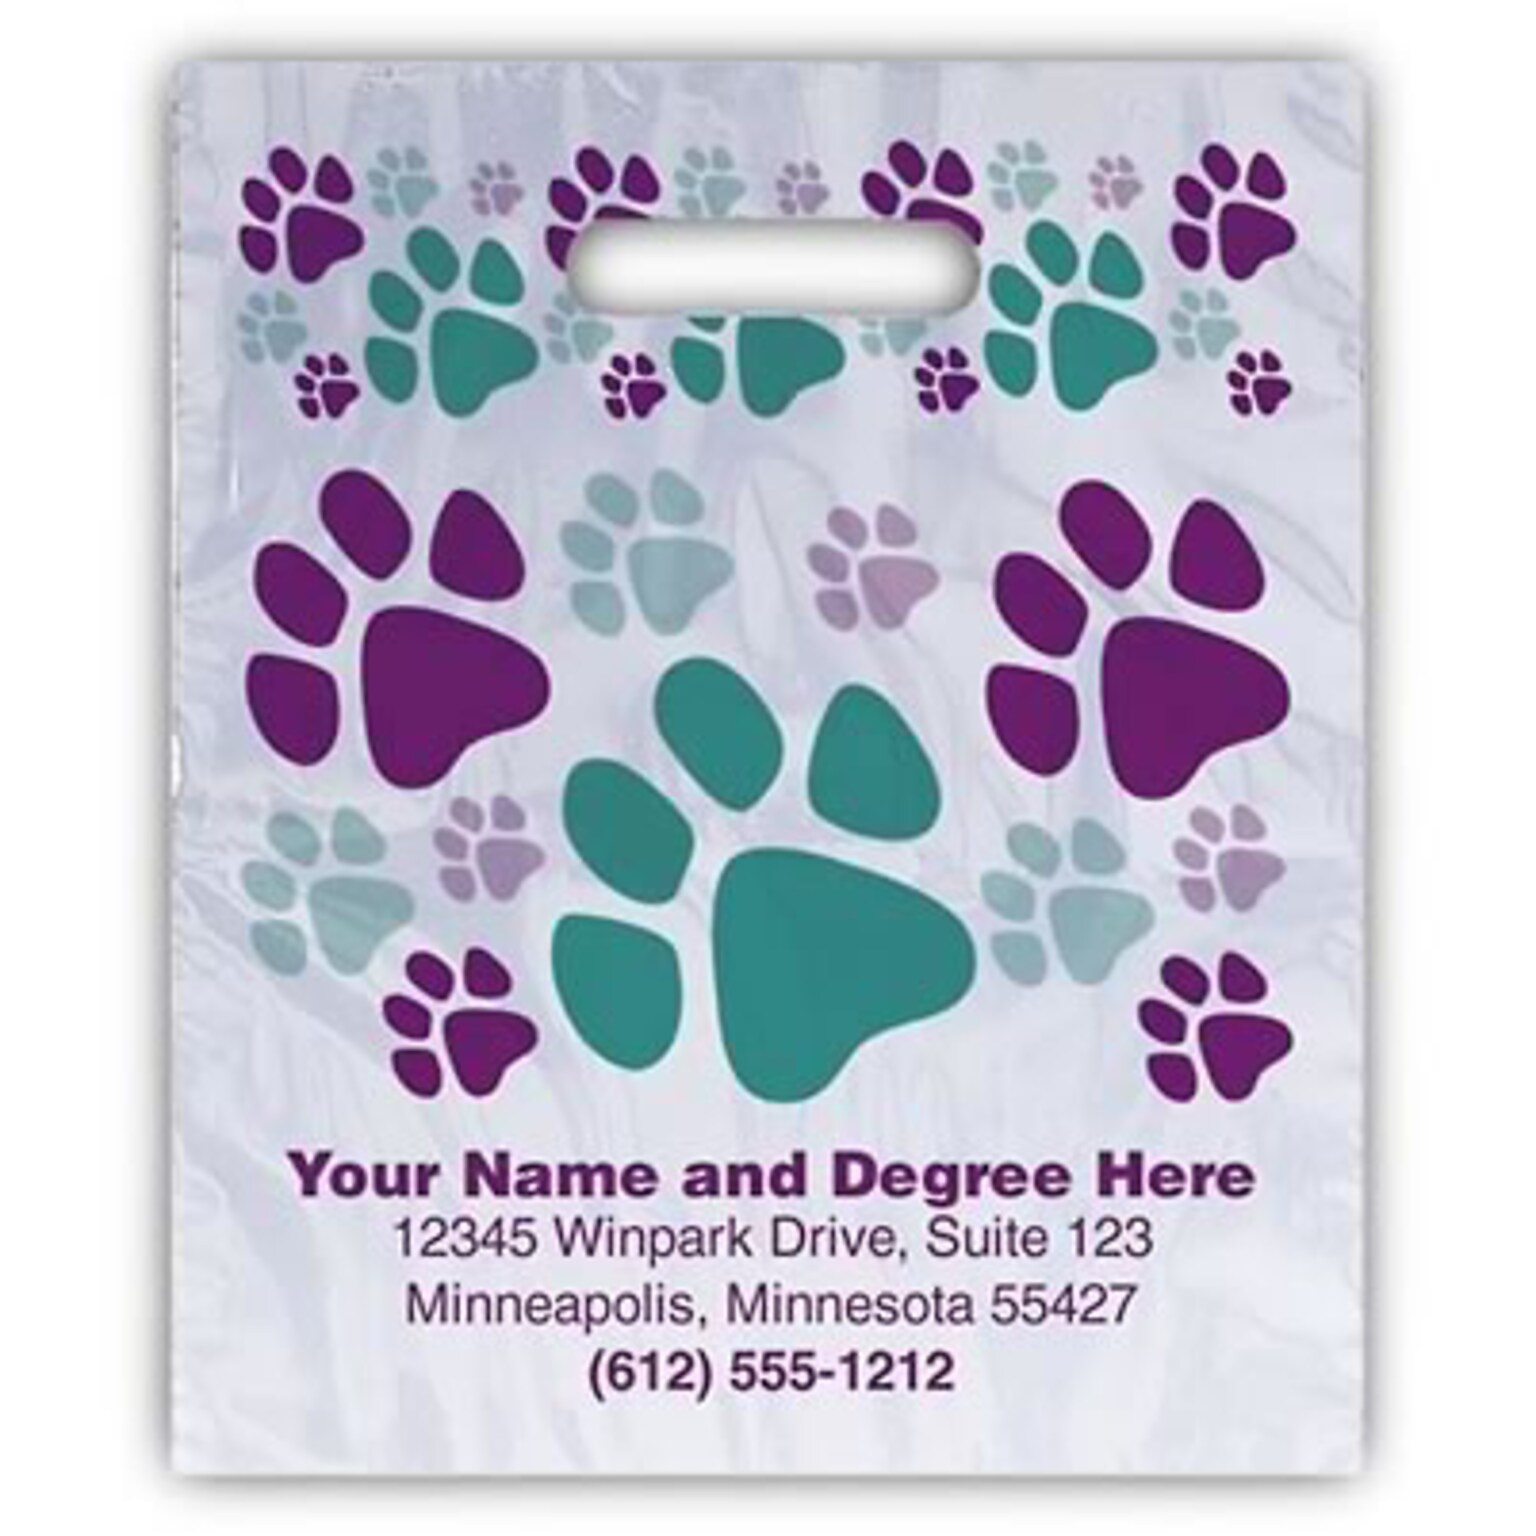 Medical Arts Press® Veterinary Personalized Small 2-Color Supply Bags; 7-1/2x9, Large & Small Paw Prints, 100 Bags, (55772)